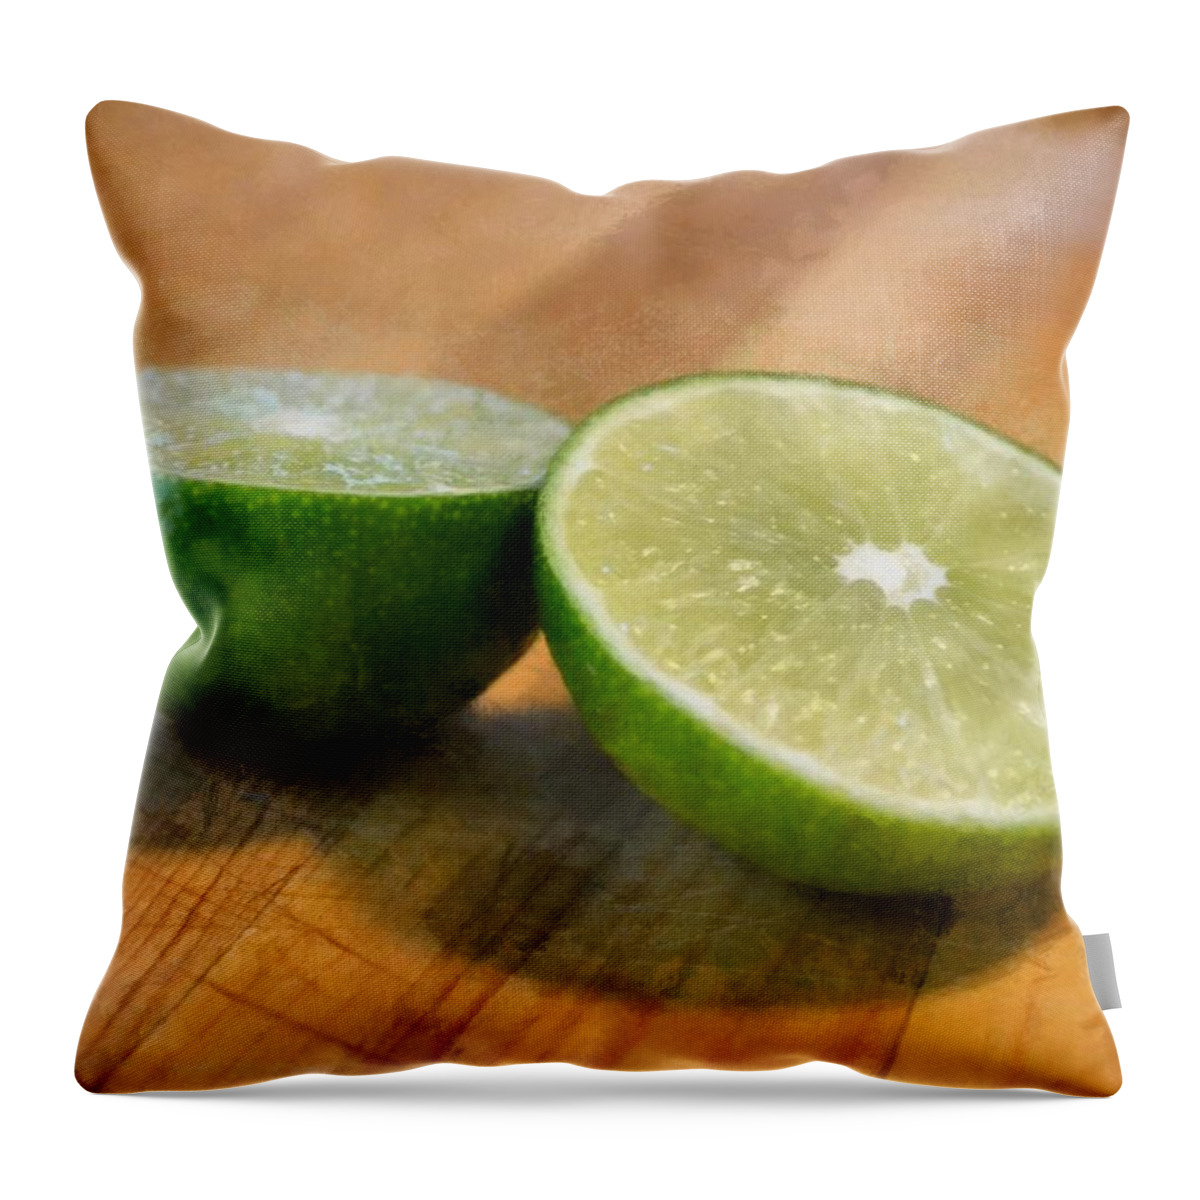 Lime Throw Pillow featuring the photograph Lime by Michelle Calkins